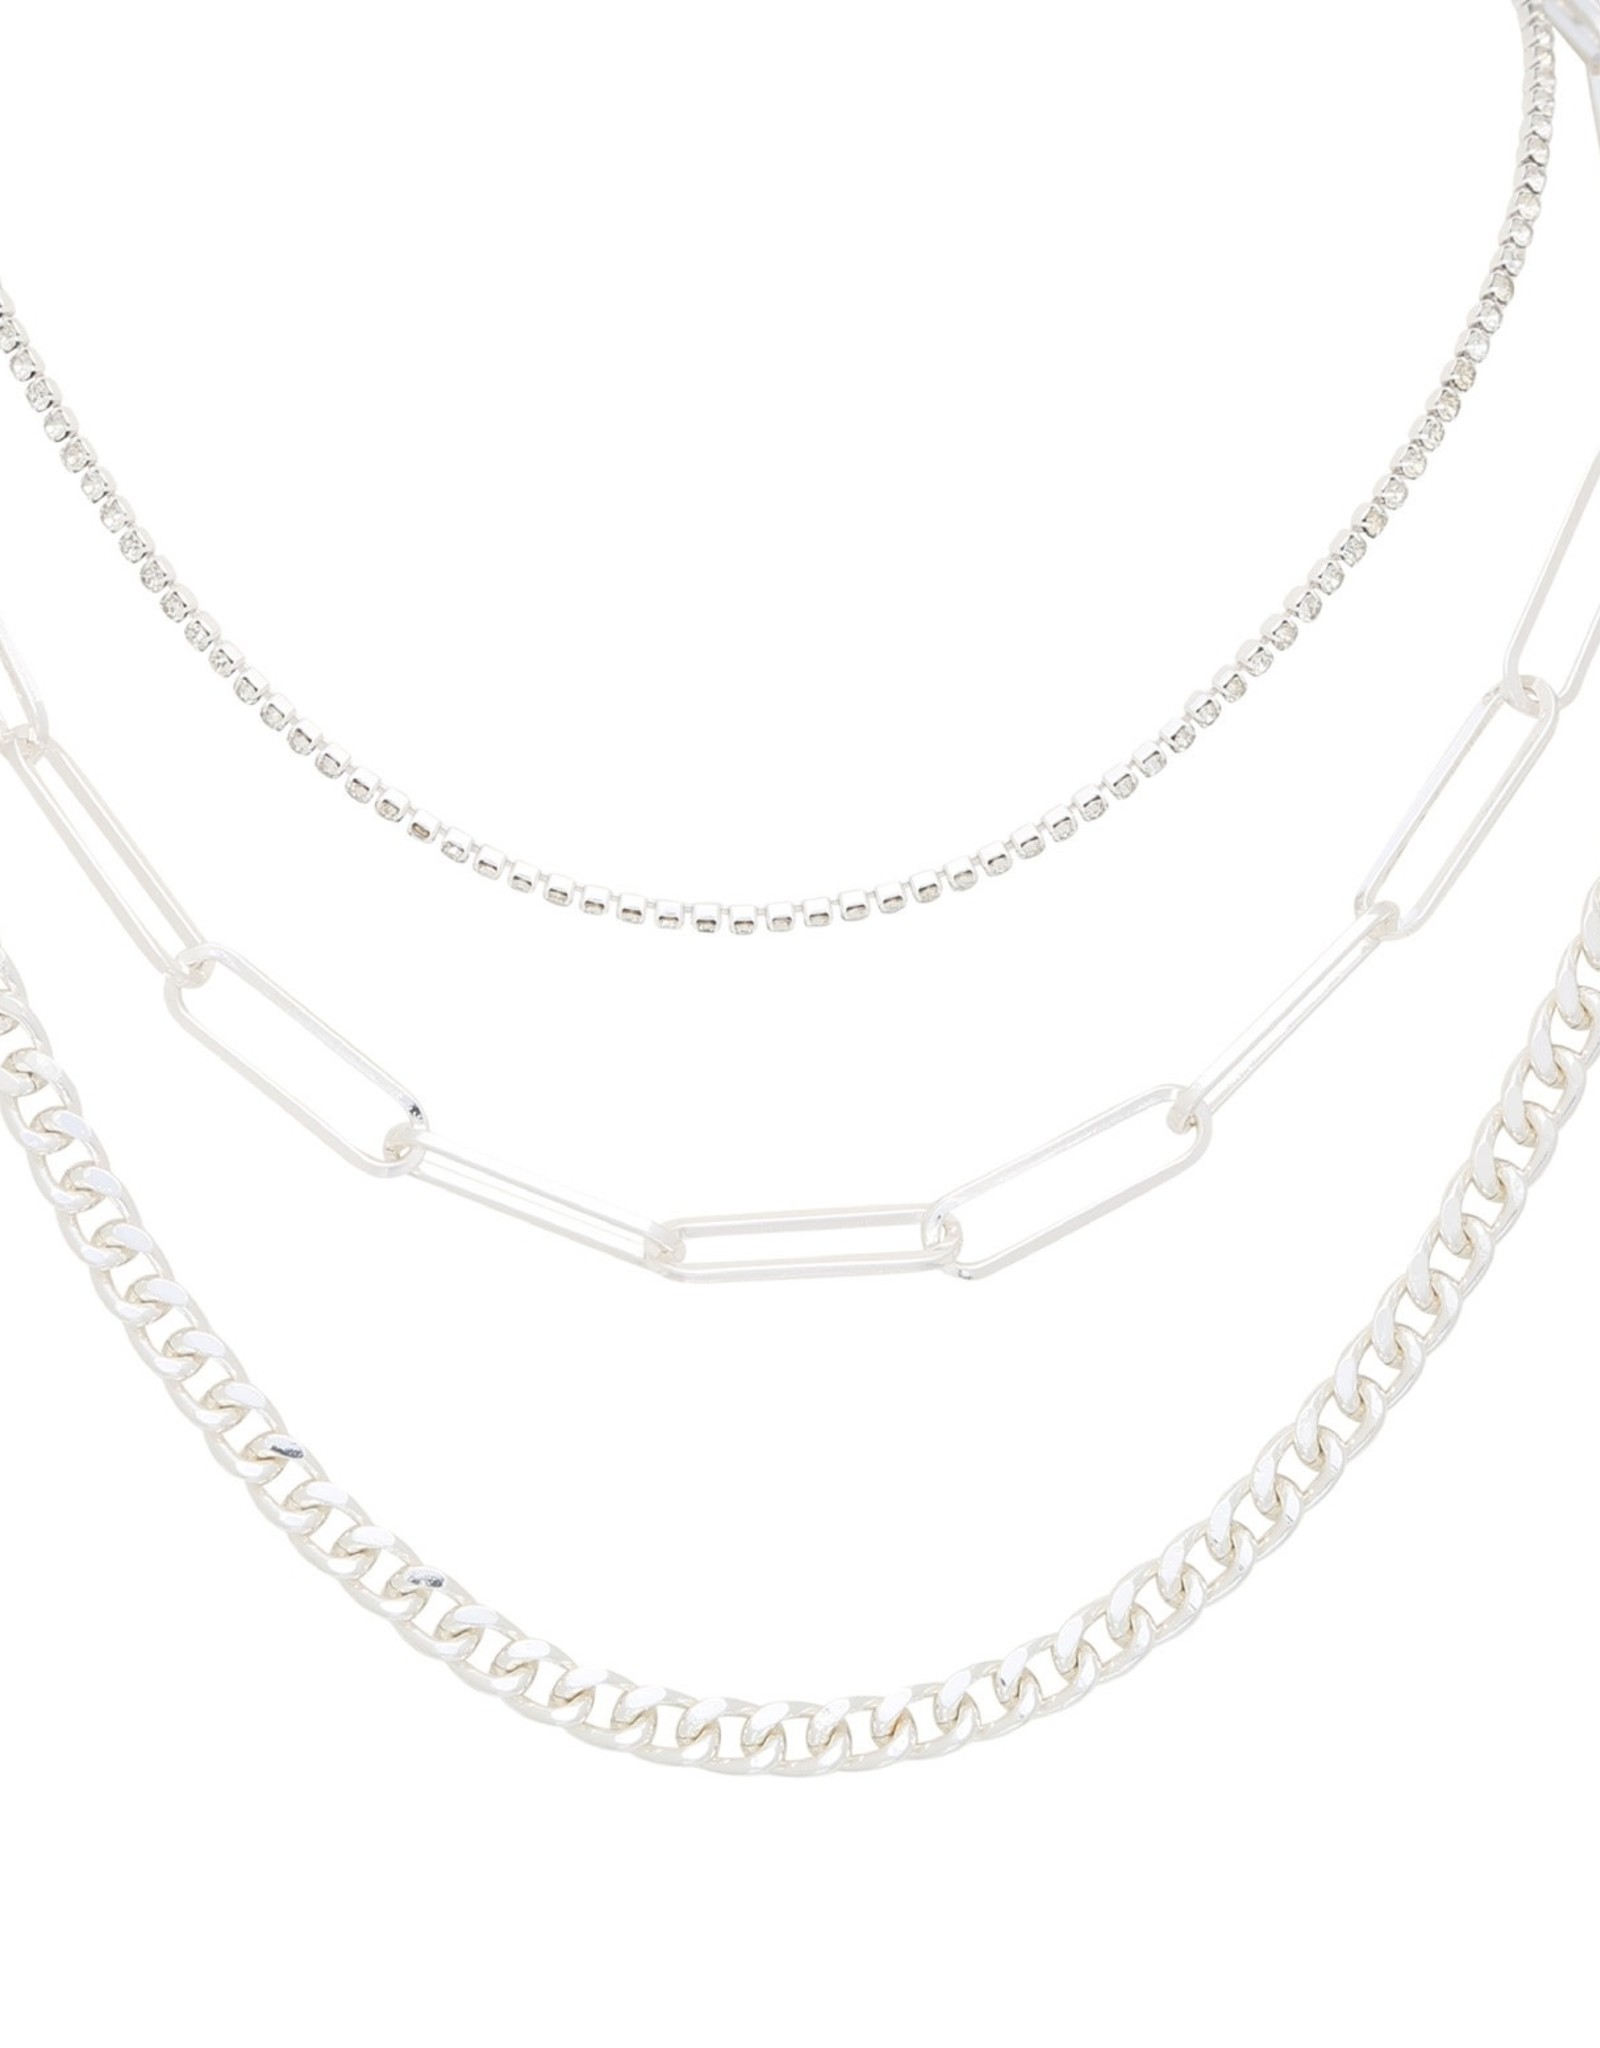 Merx Inc. Multi Layered Link Chain Necklace Silver